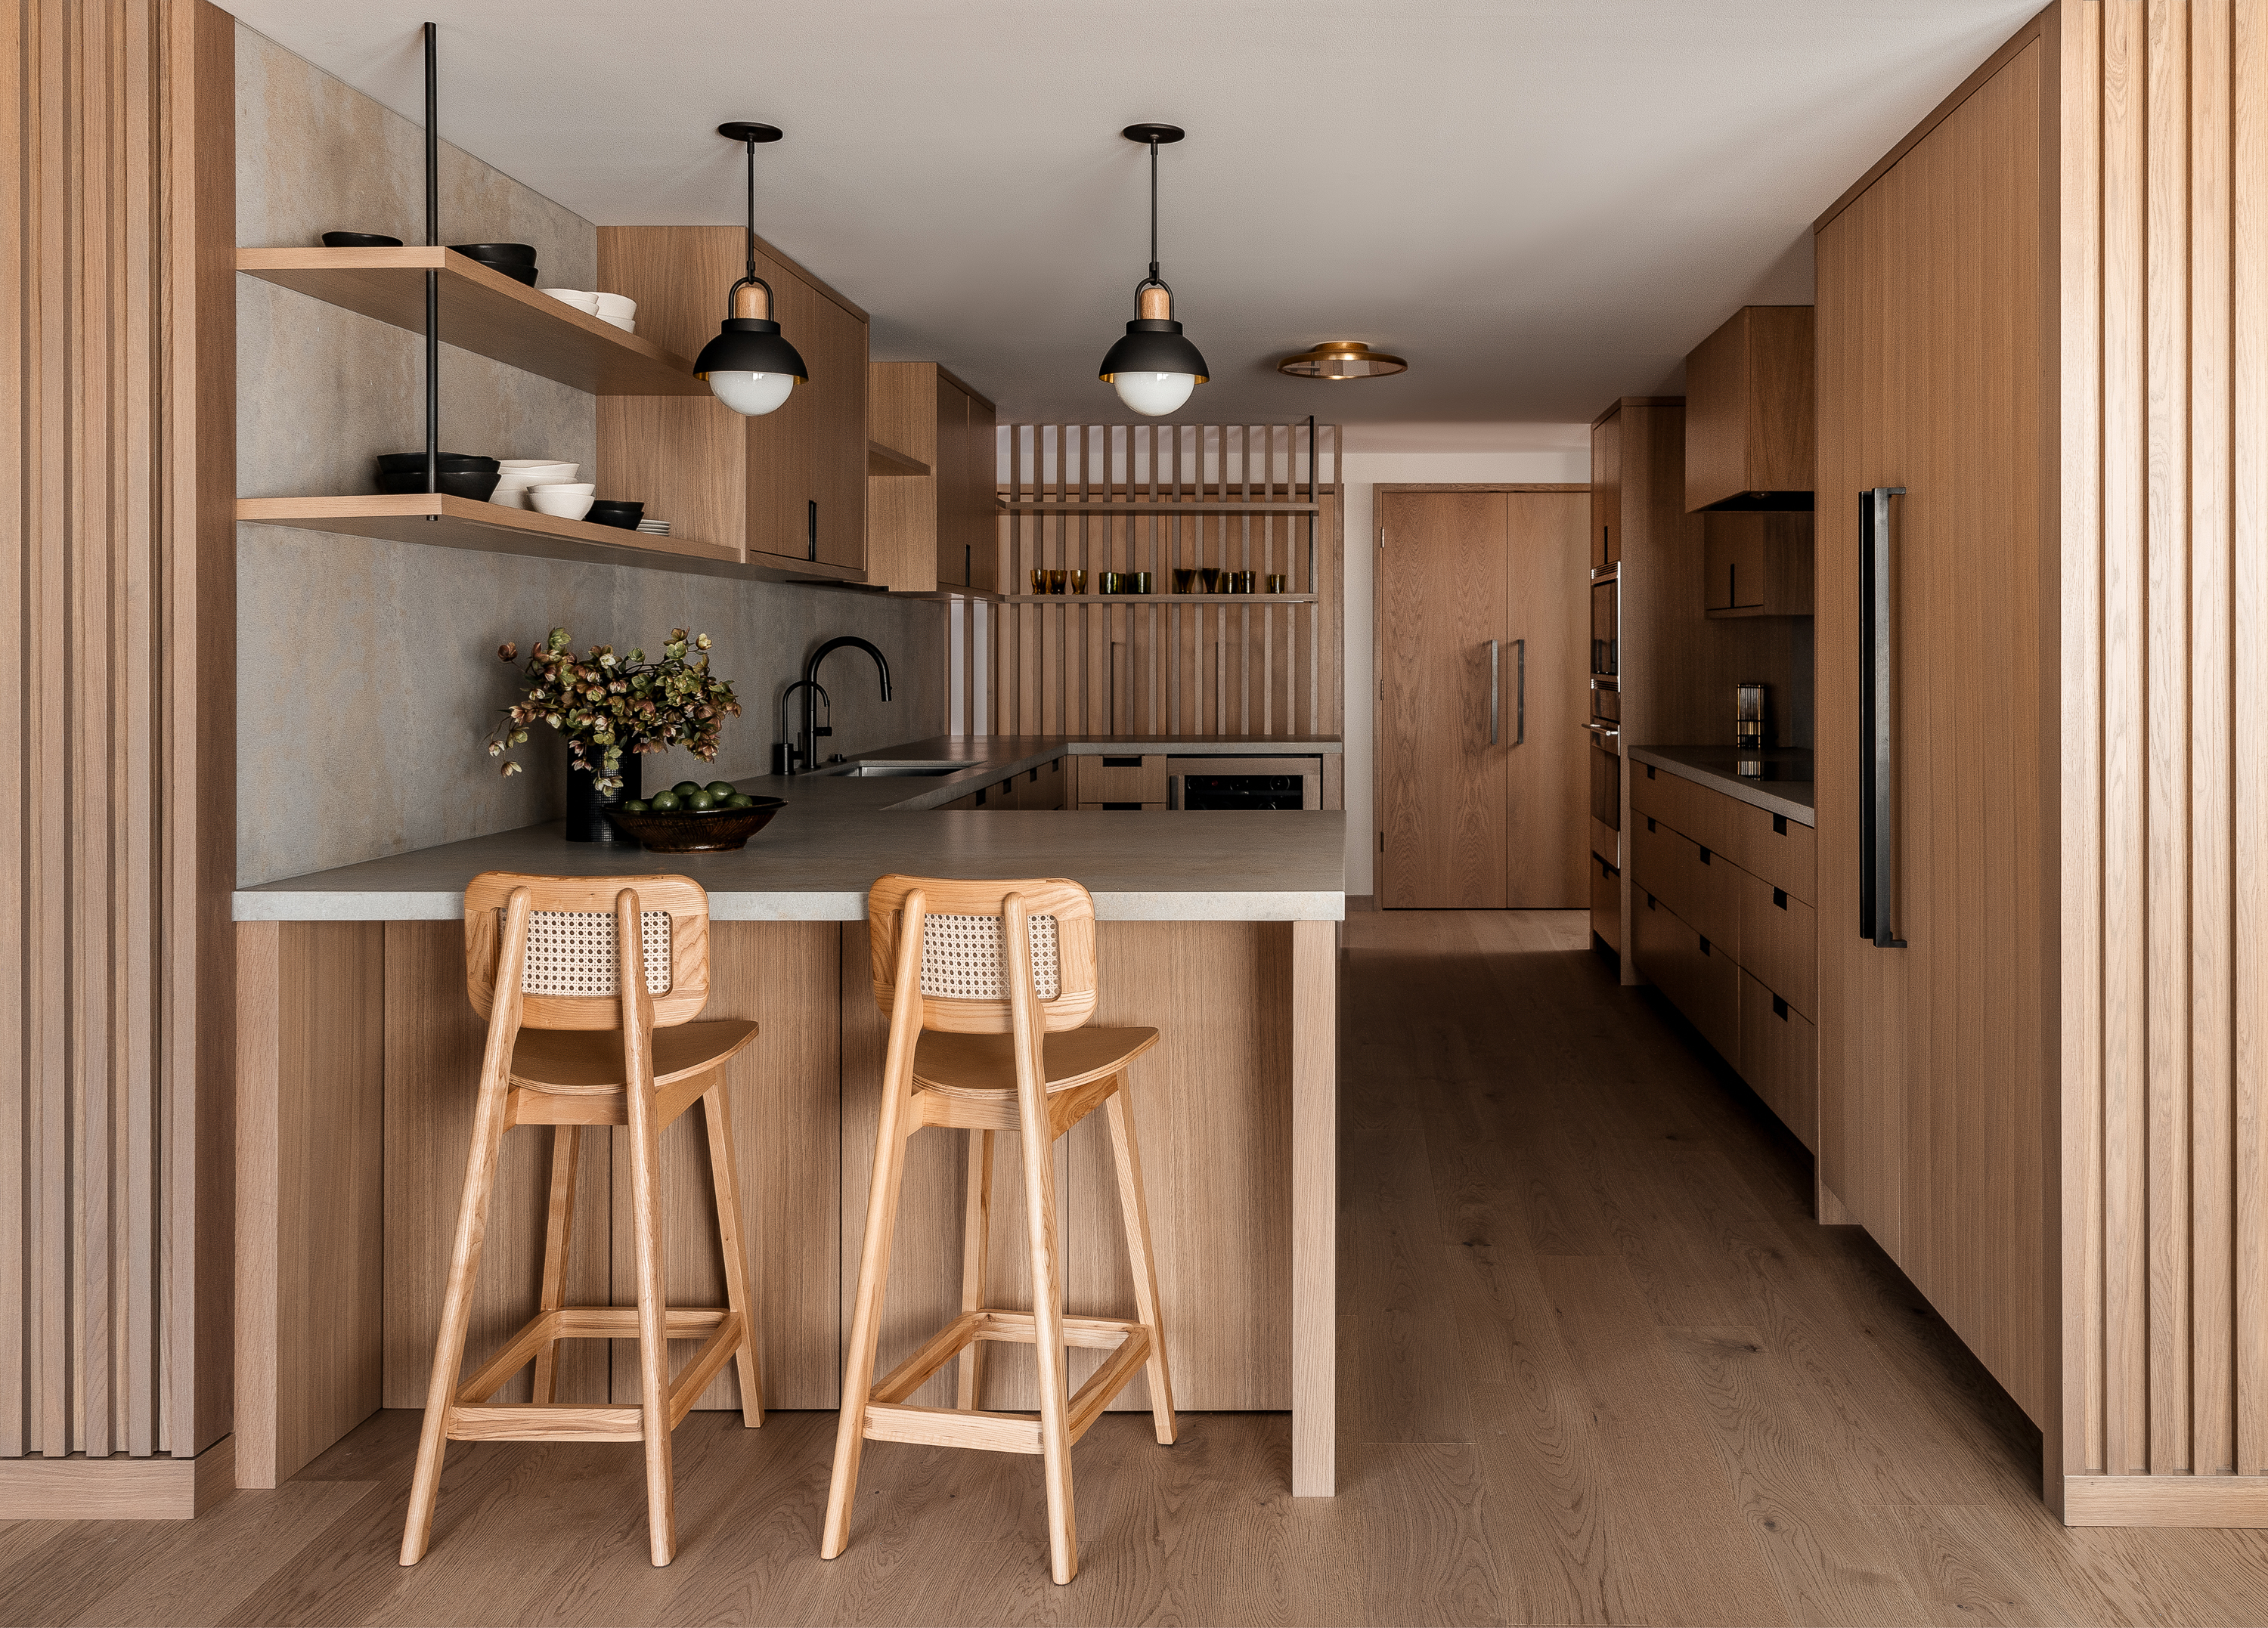 Kitchen renovation with custom white oak cabinets, domino counter stools, and allied maker pendants.